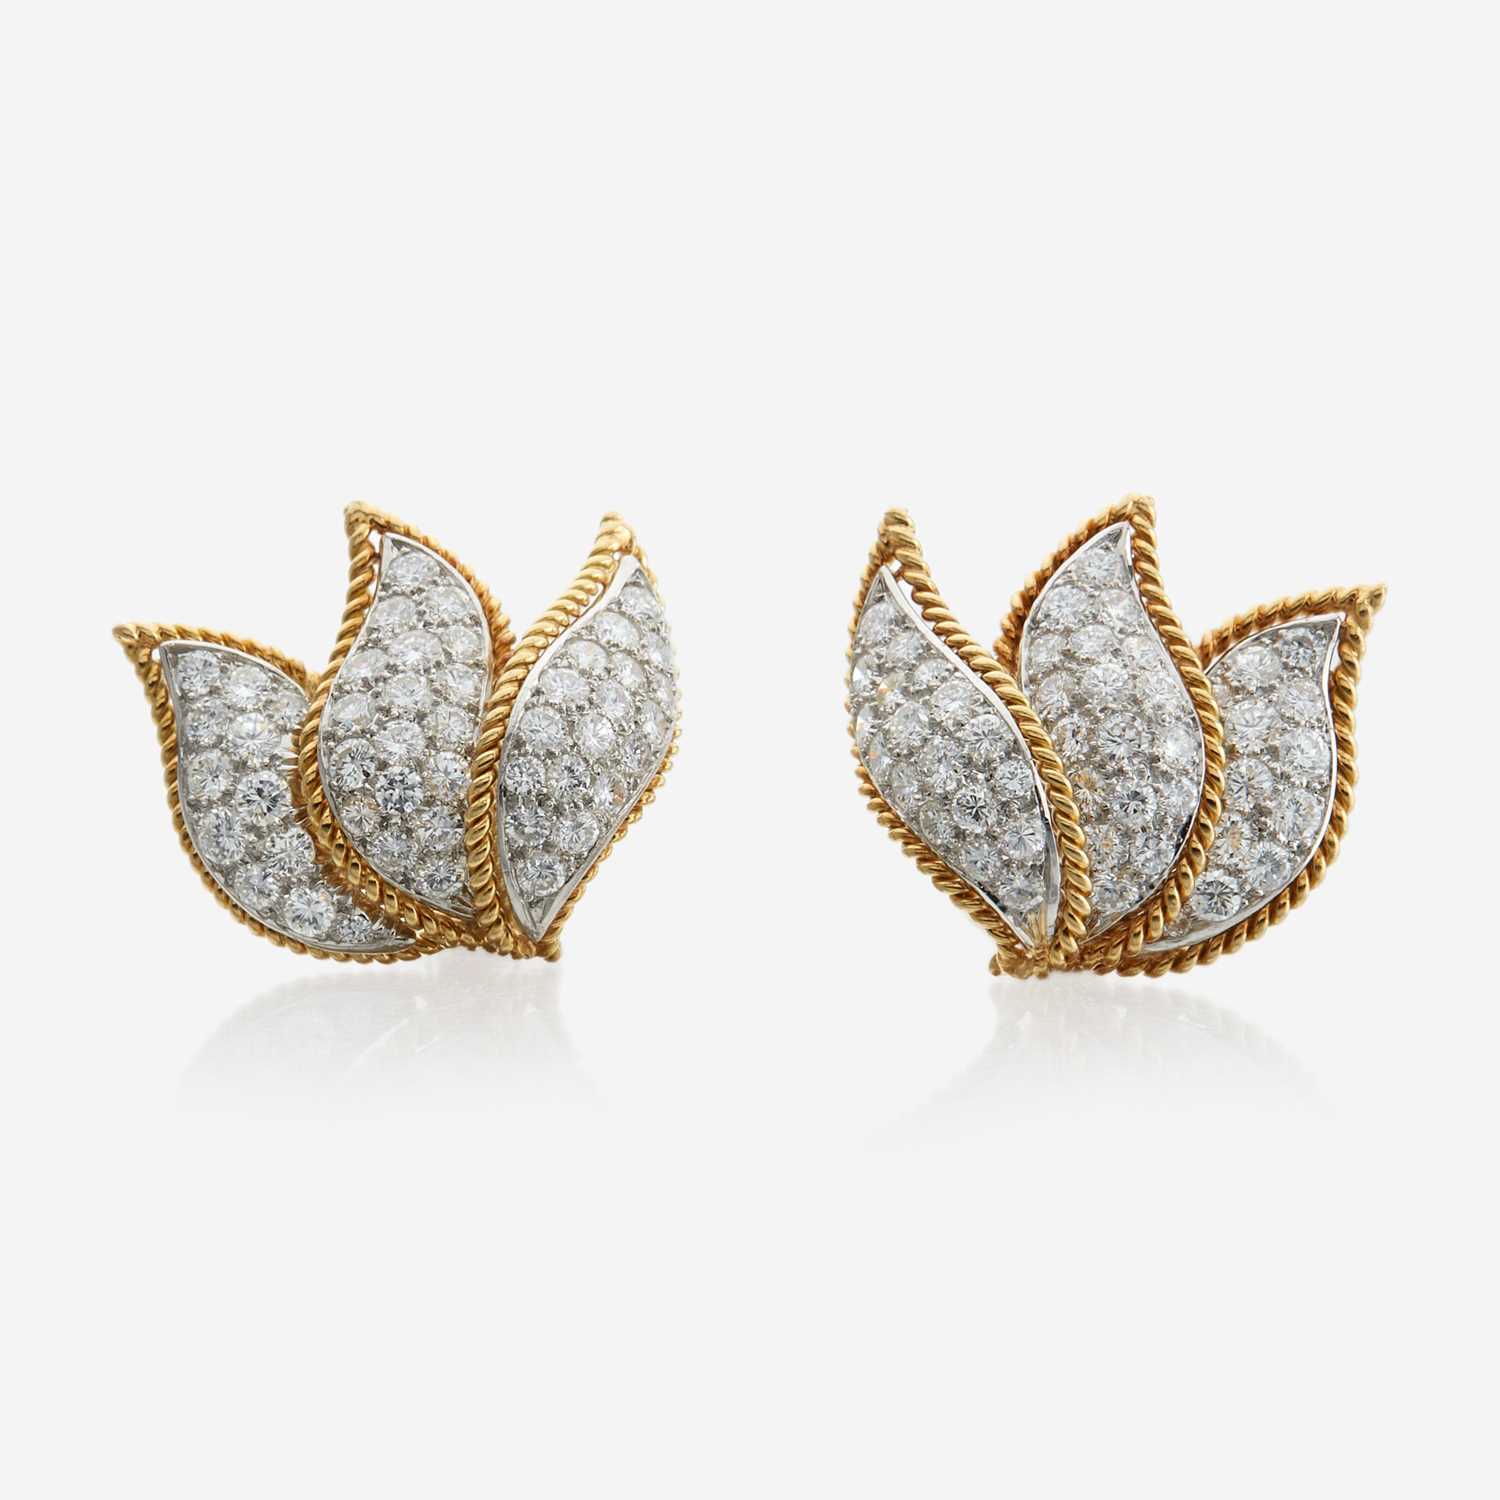 Lot 13 - A pair of gold, platinum, and diamond ear clips, Tiffany & Co.